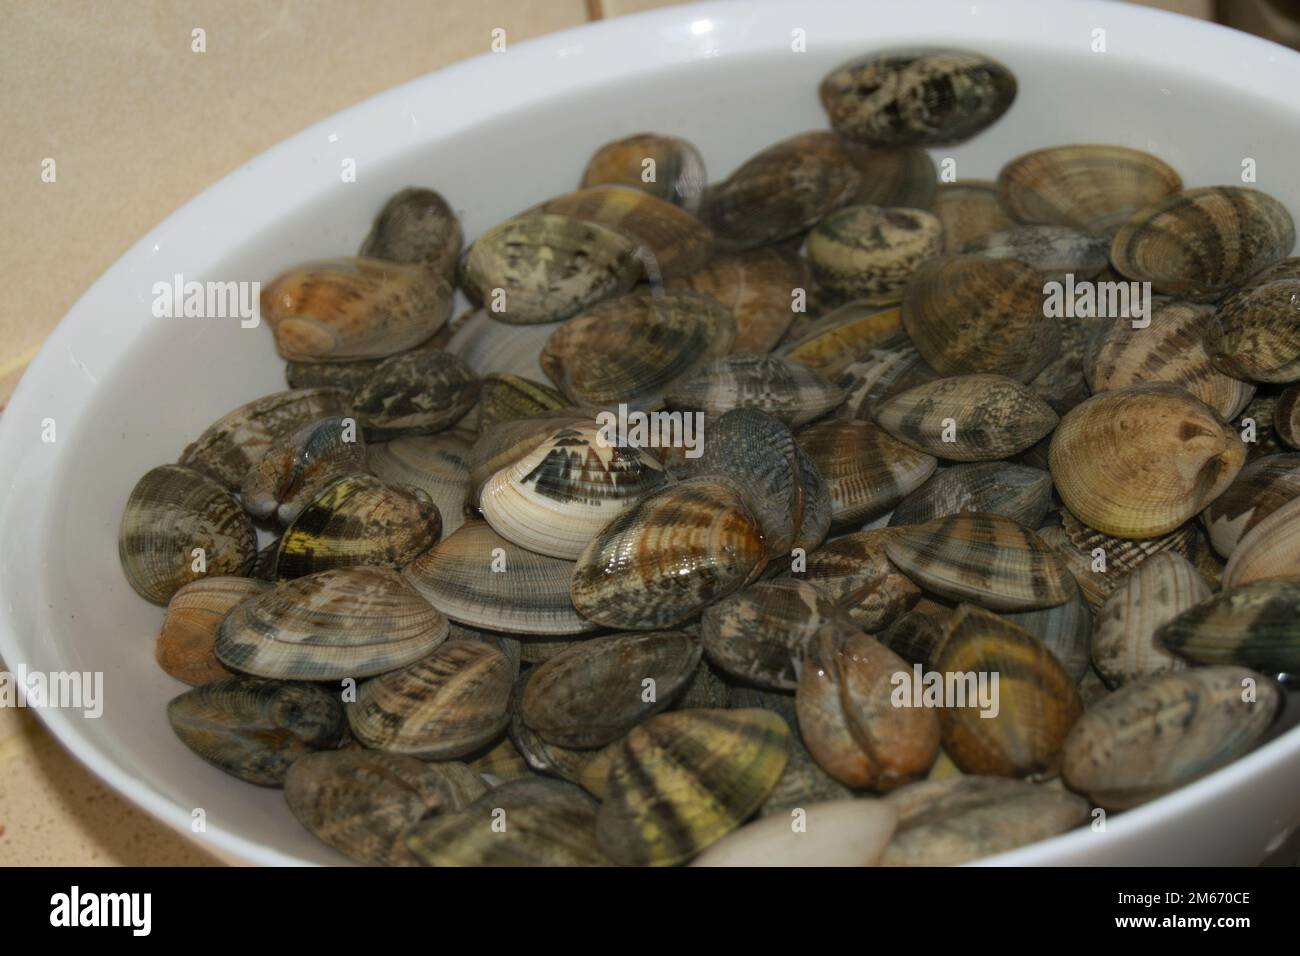 Spisula sachalinensis, the Sakhalin surf clam, is a species of edible saltwater clam in the family Mactridae, the surf clams or trough clams. Stock Photo